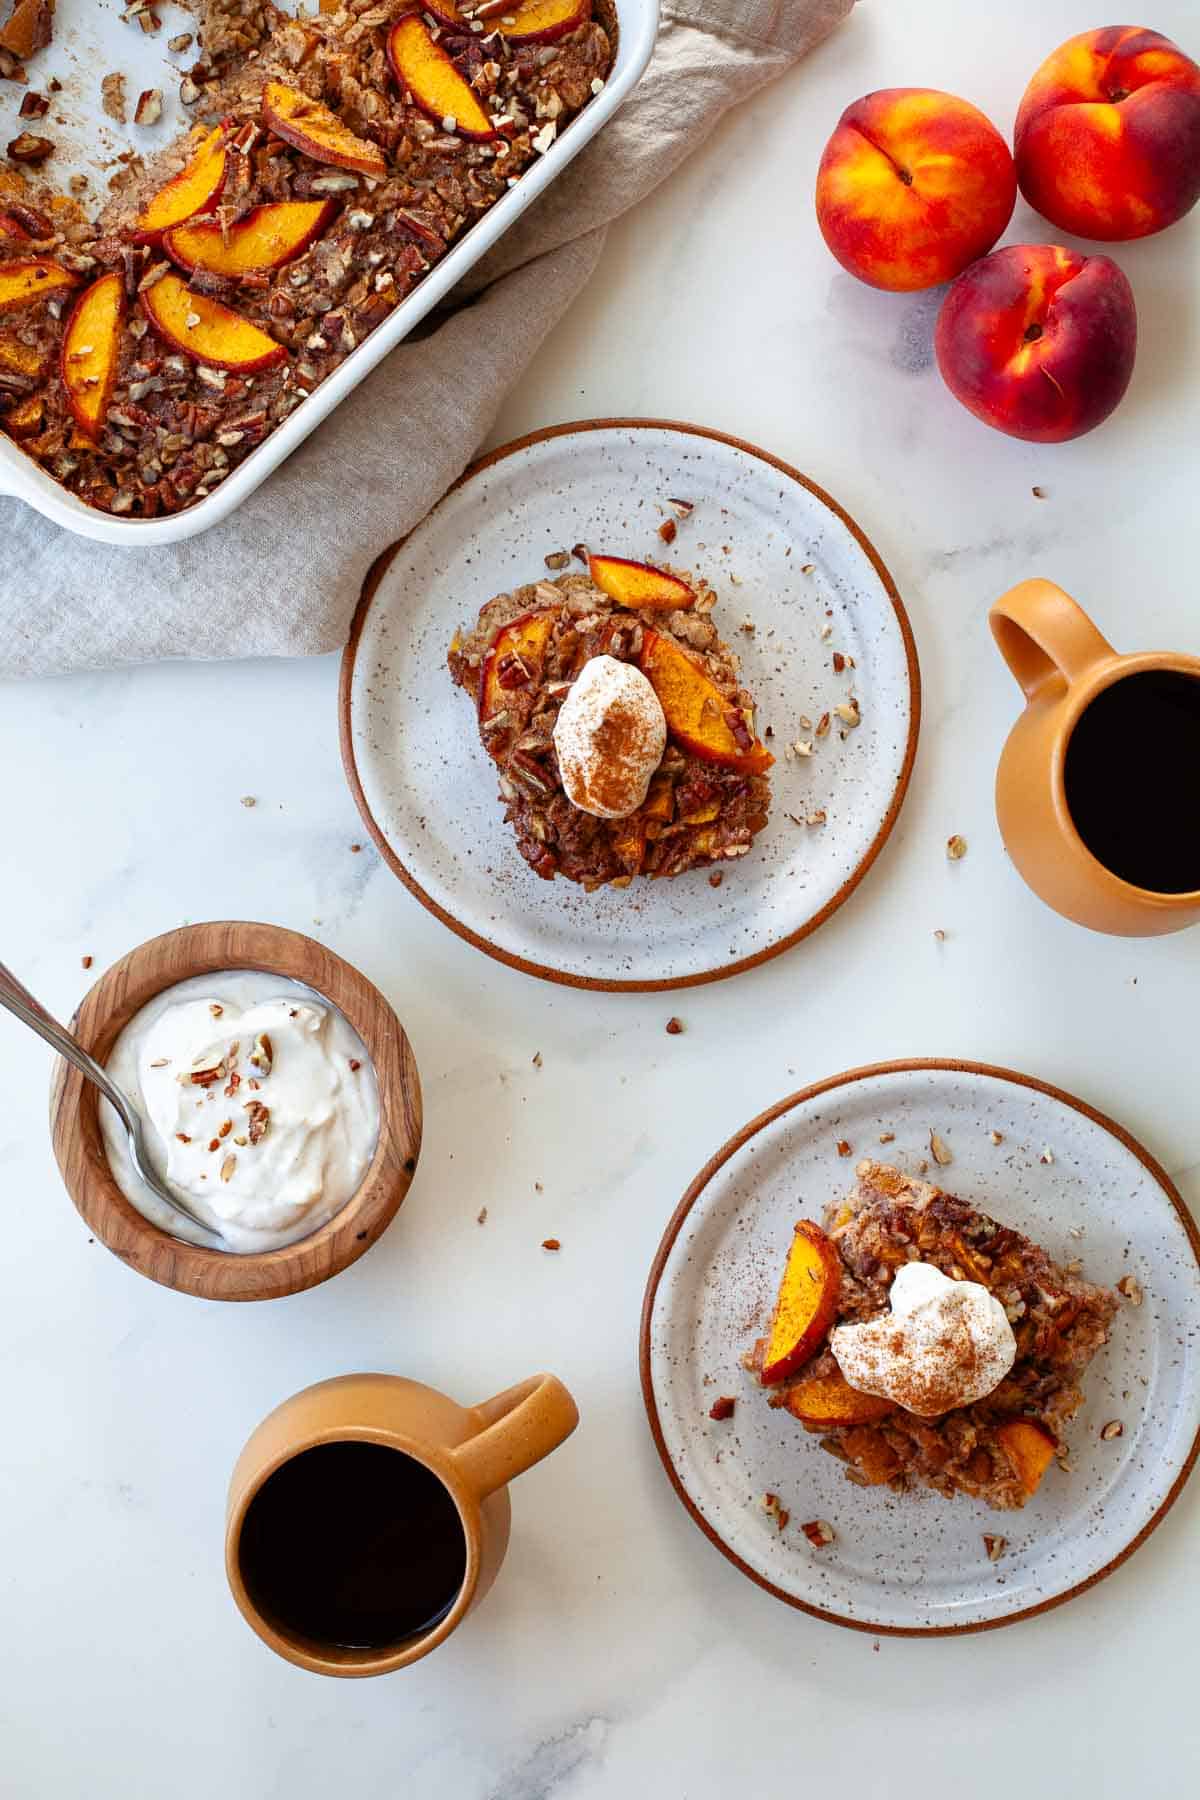 two white speckled plates with peach baked oatmeal beside two orange coffee mugs, a wooden bowl filled with yogurt, peaches, and a baking dish with peach baked oatmeal